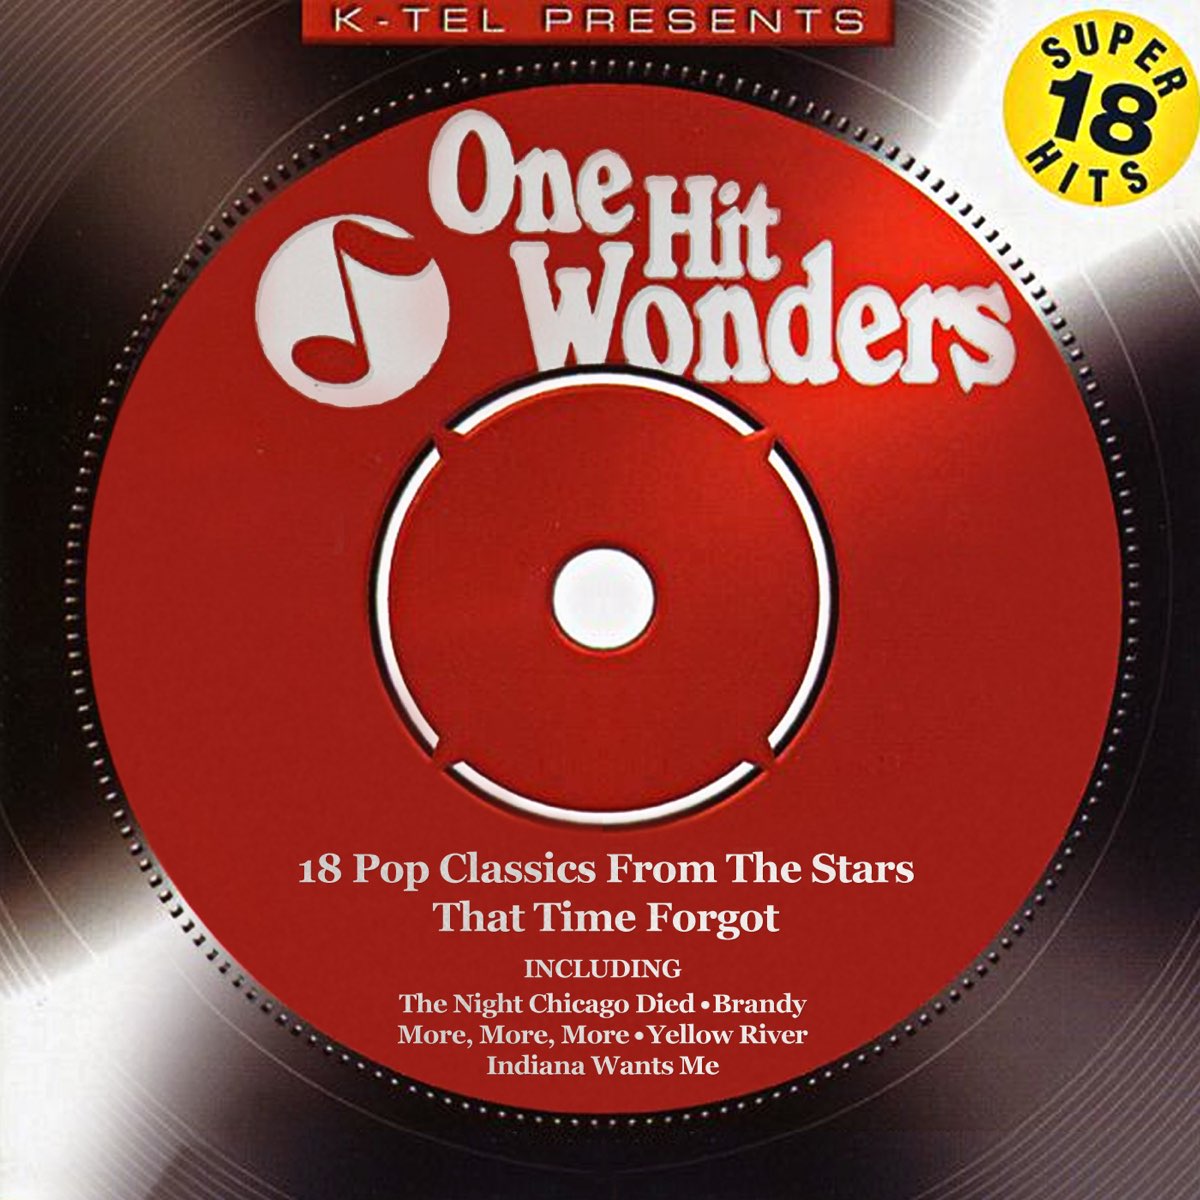 One Hit Wonders - 18 Pop Classics from Stars That Time Forgot (Rerecorded Version) by Various Artists on Apple